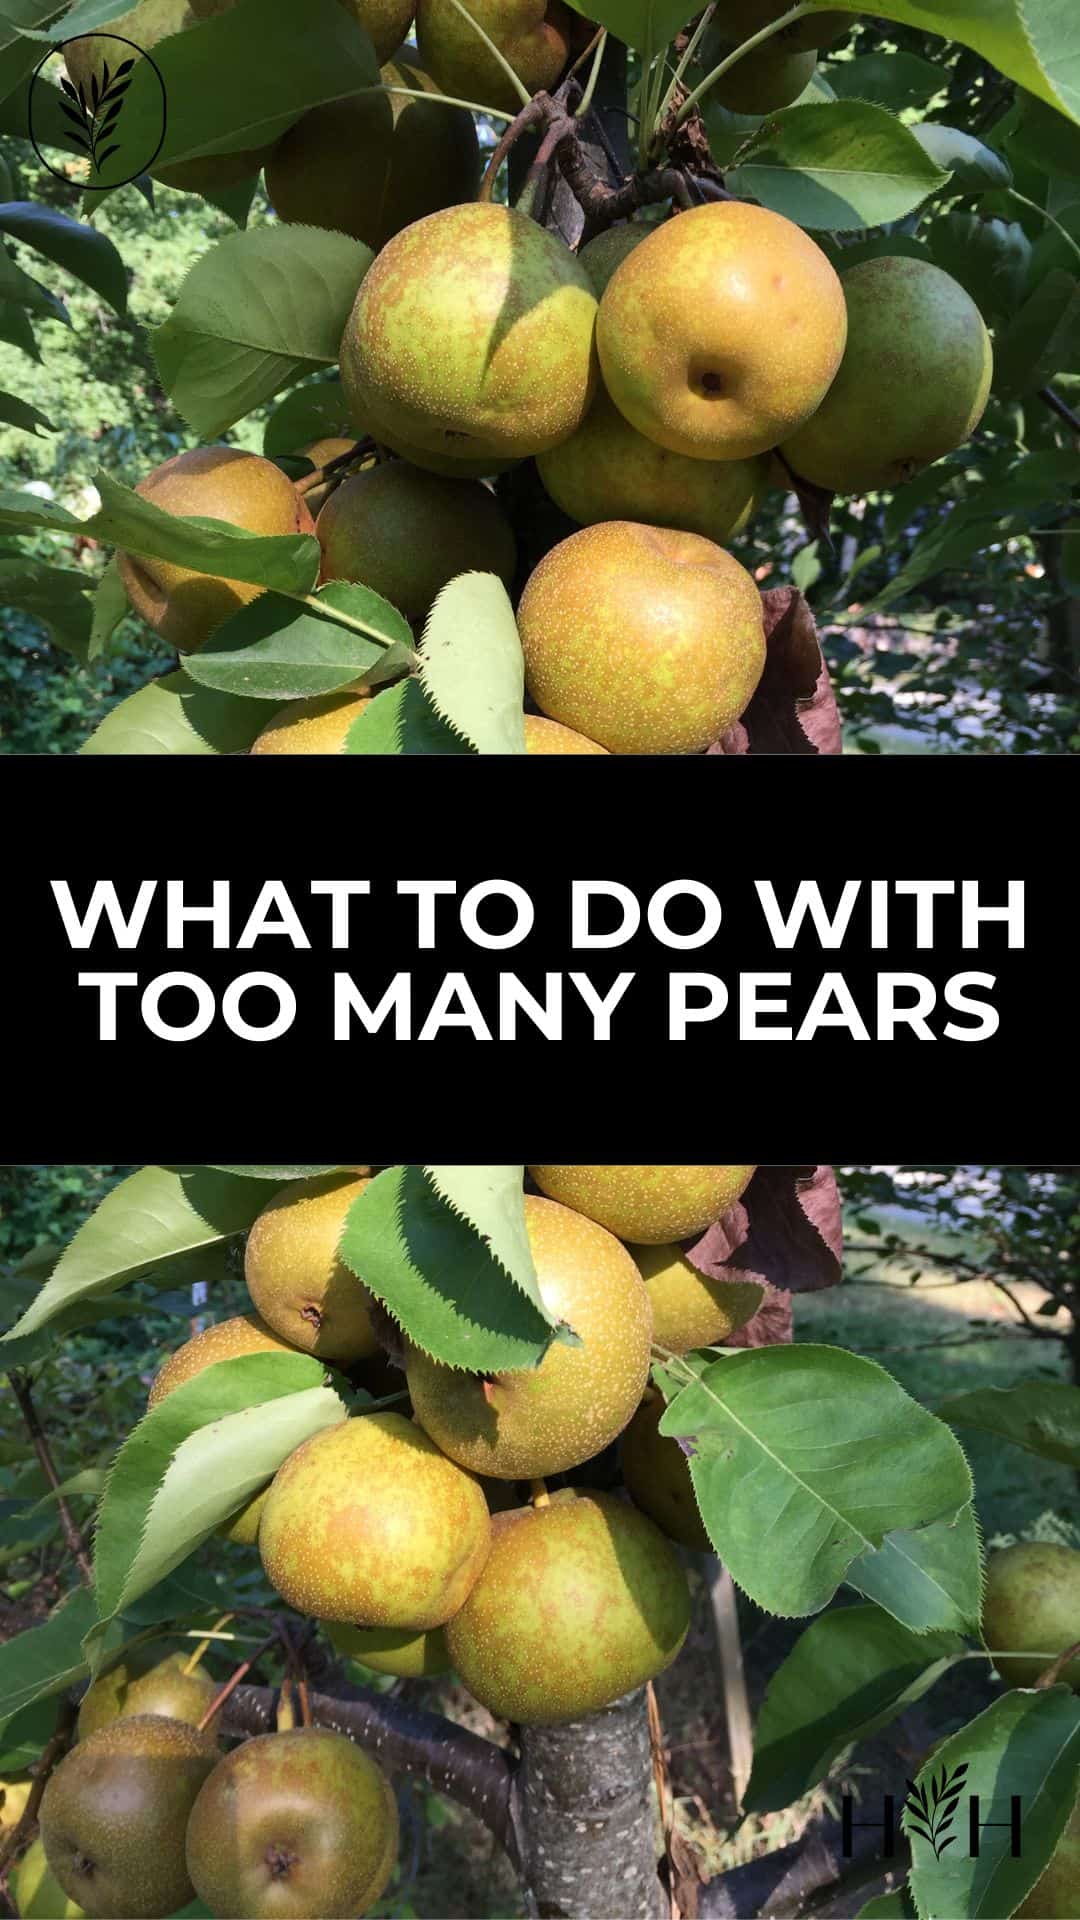 What to do with too many pears via @home4theharvest